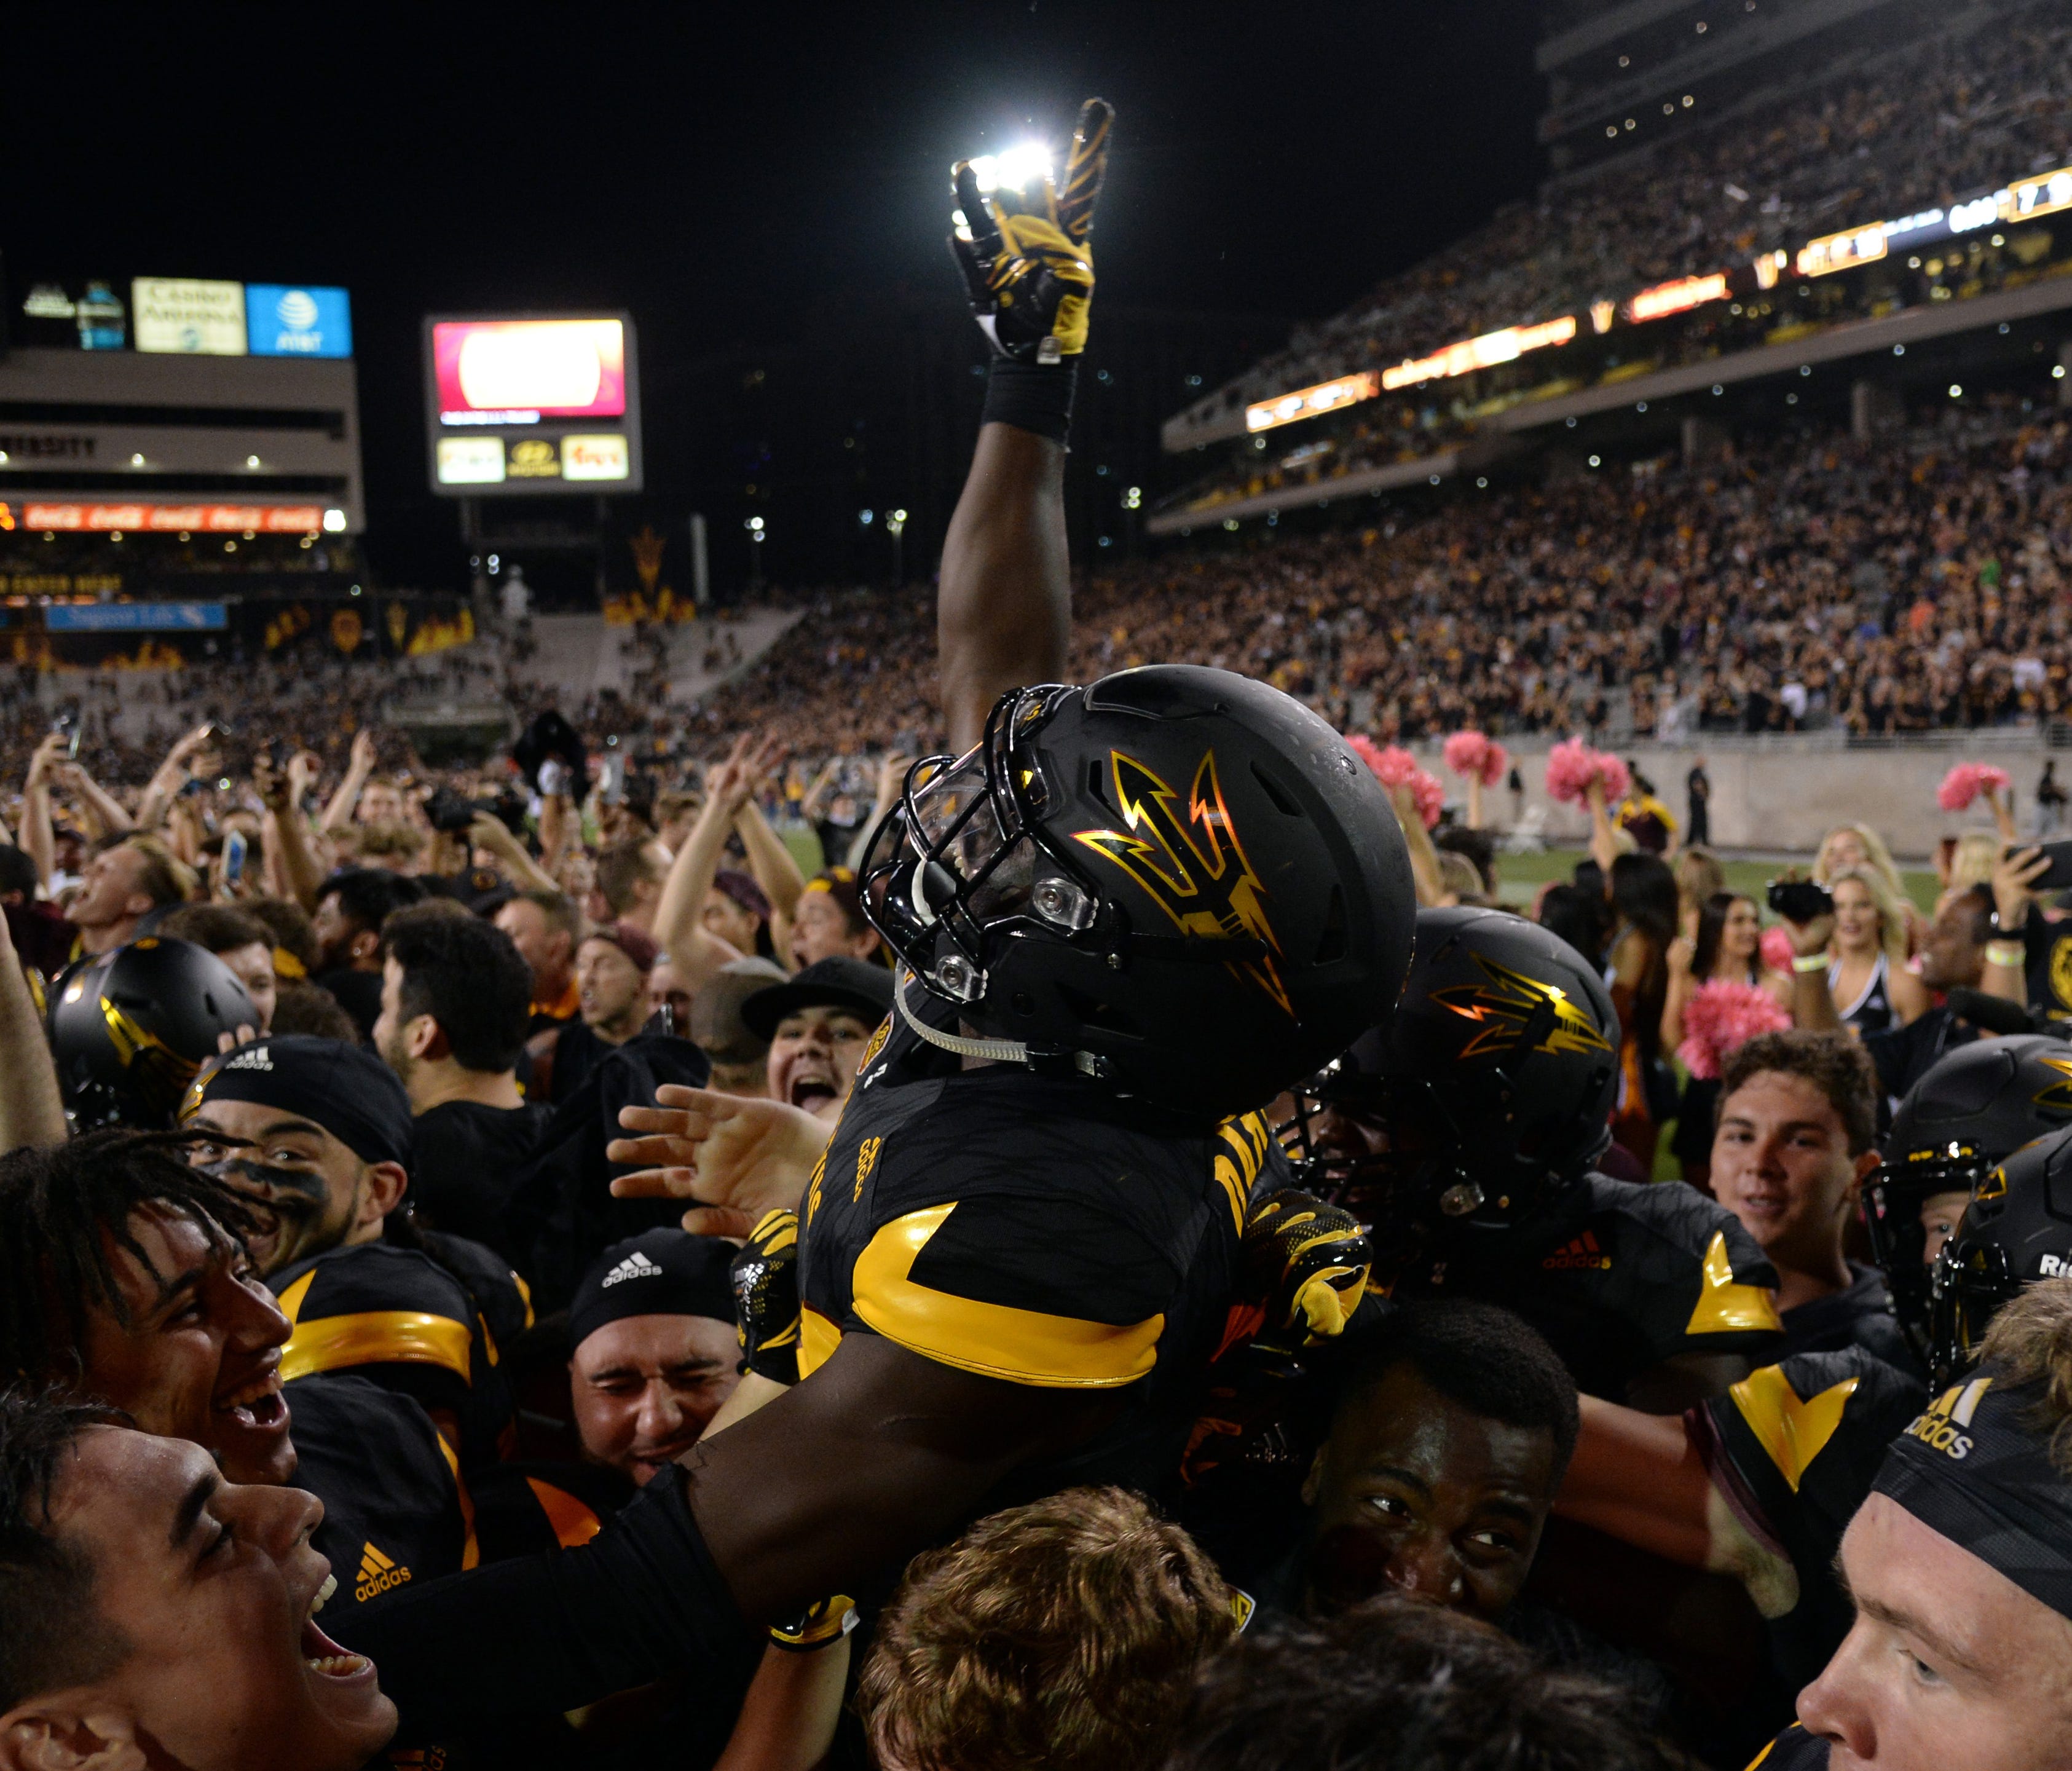 Arizona State players and fans celebrate after the Sun Devils upset win over Washington.